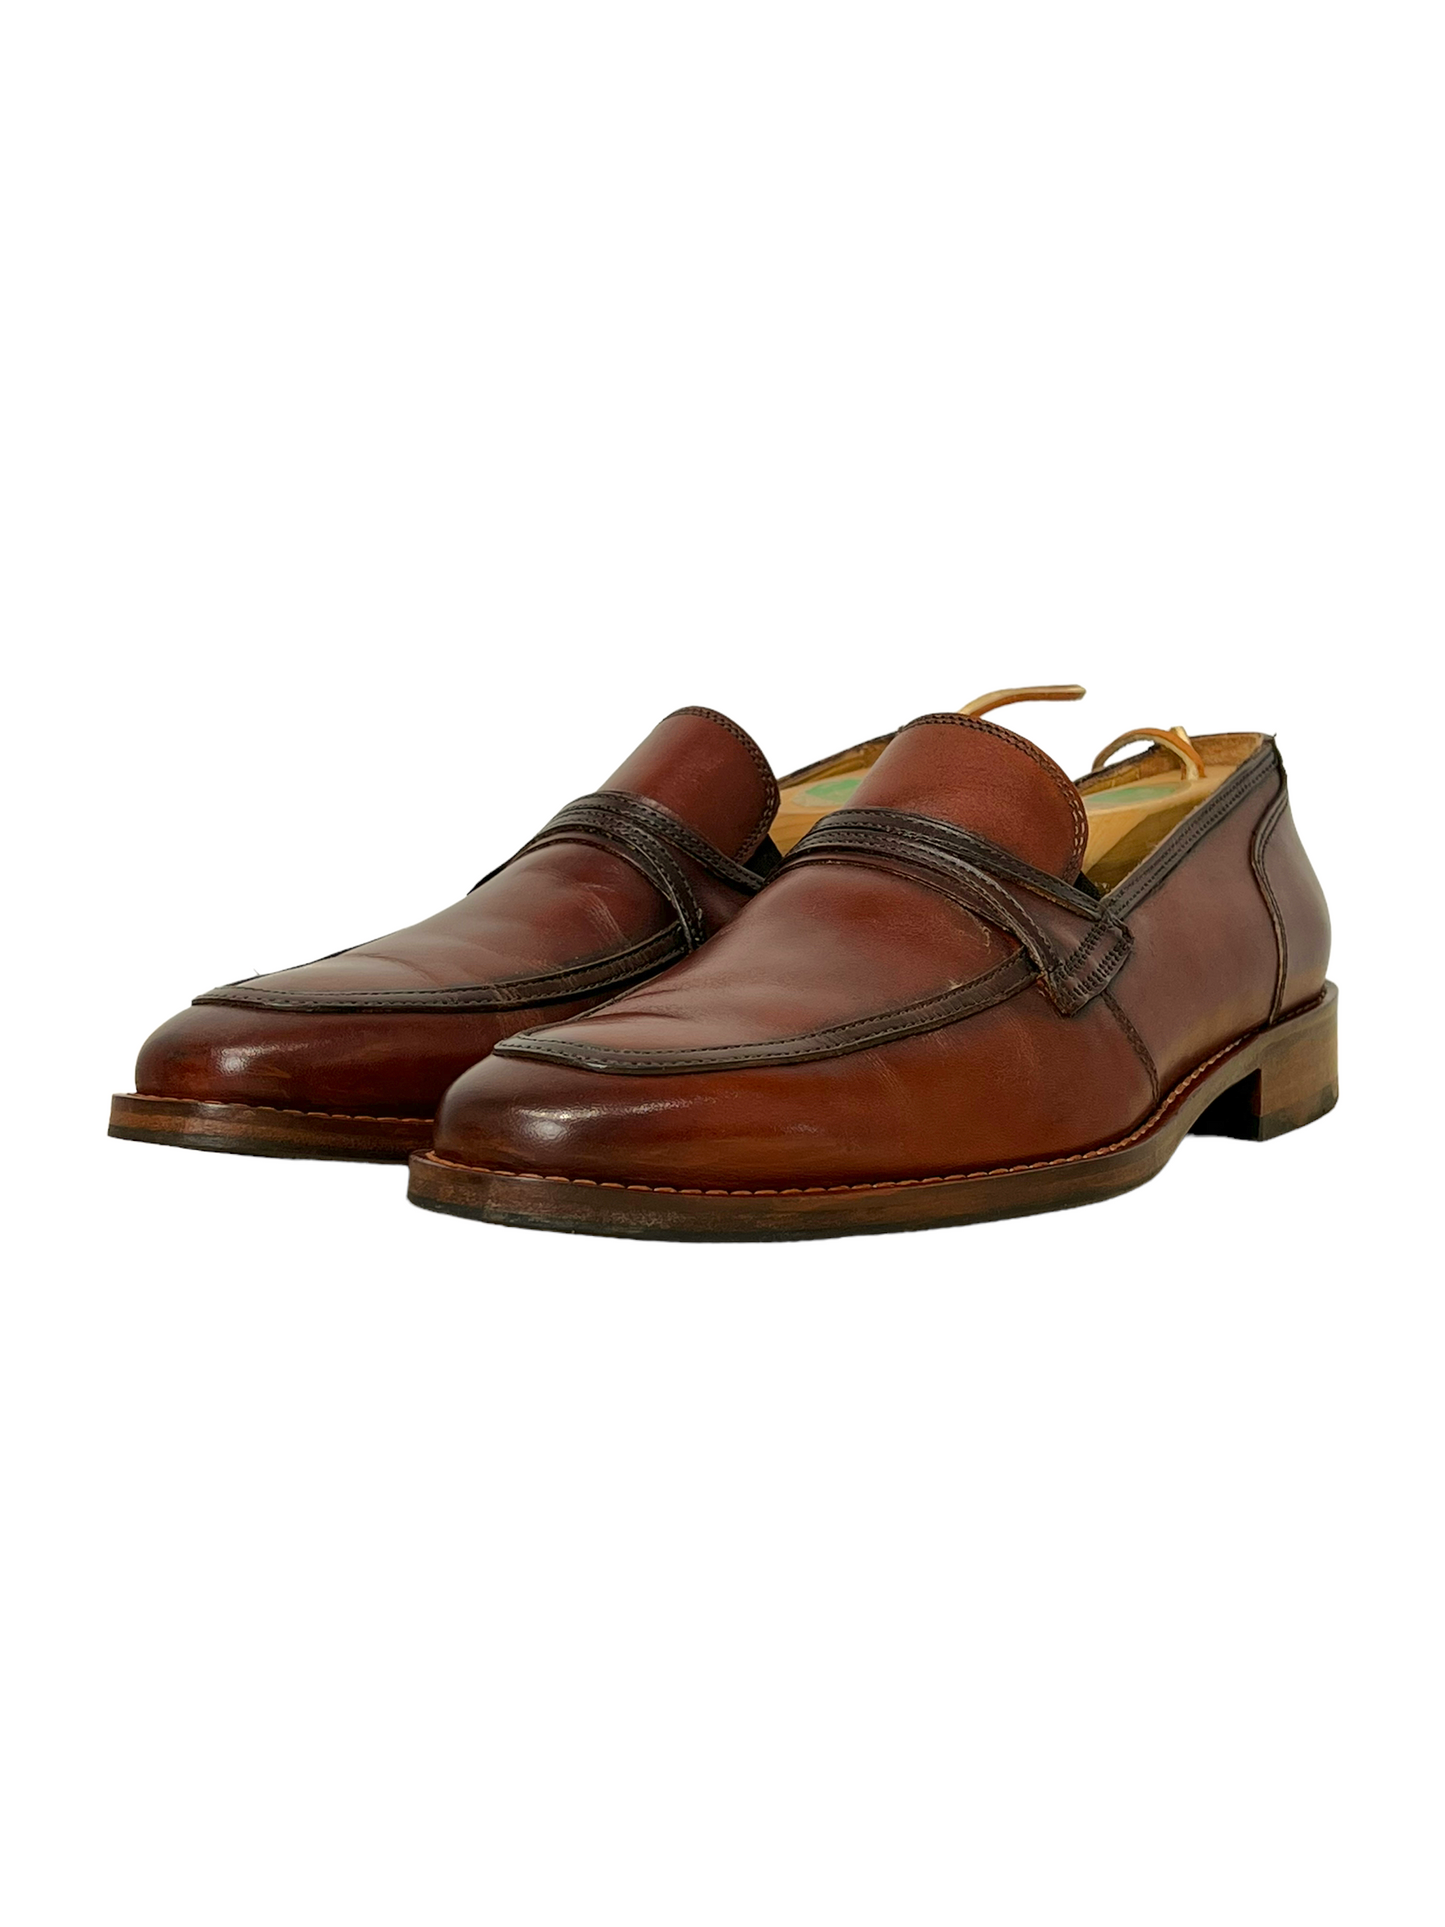 Ron White Brown Leather Penny Loafer Dress Shoes - Genuine Design Luxury Consignment for Men. New & Pre-Owned Clothing, Shoes, & Accessories. Calgary, Canada